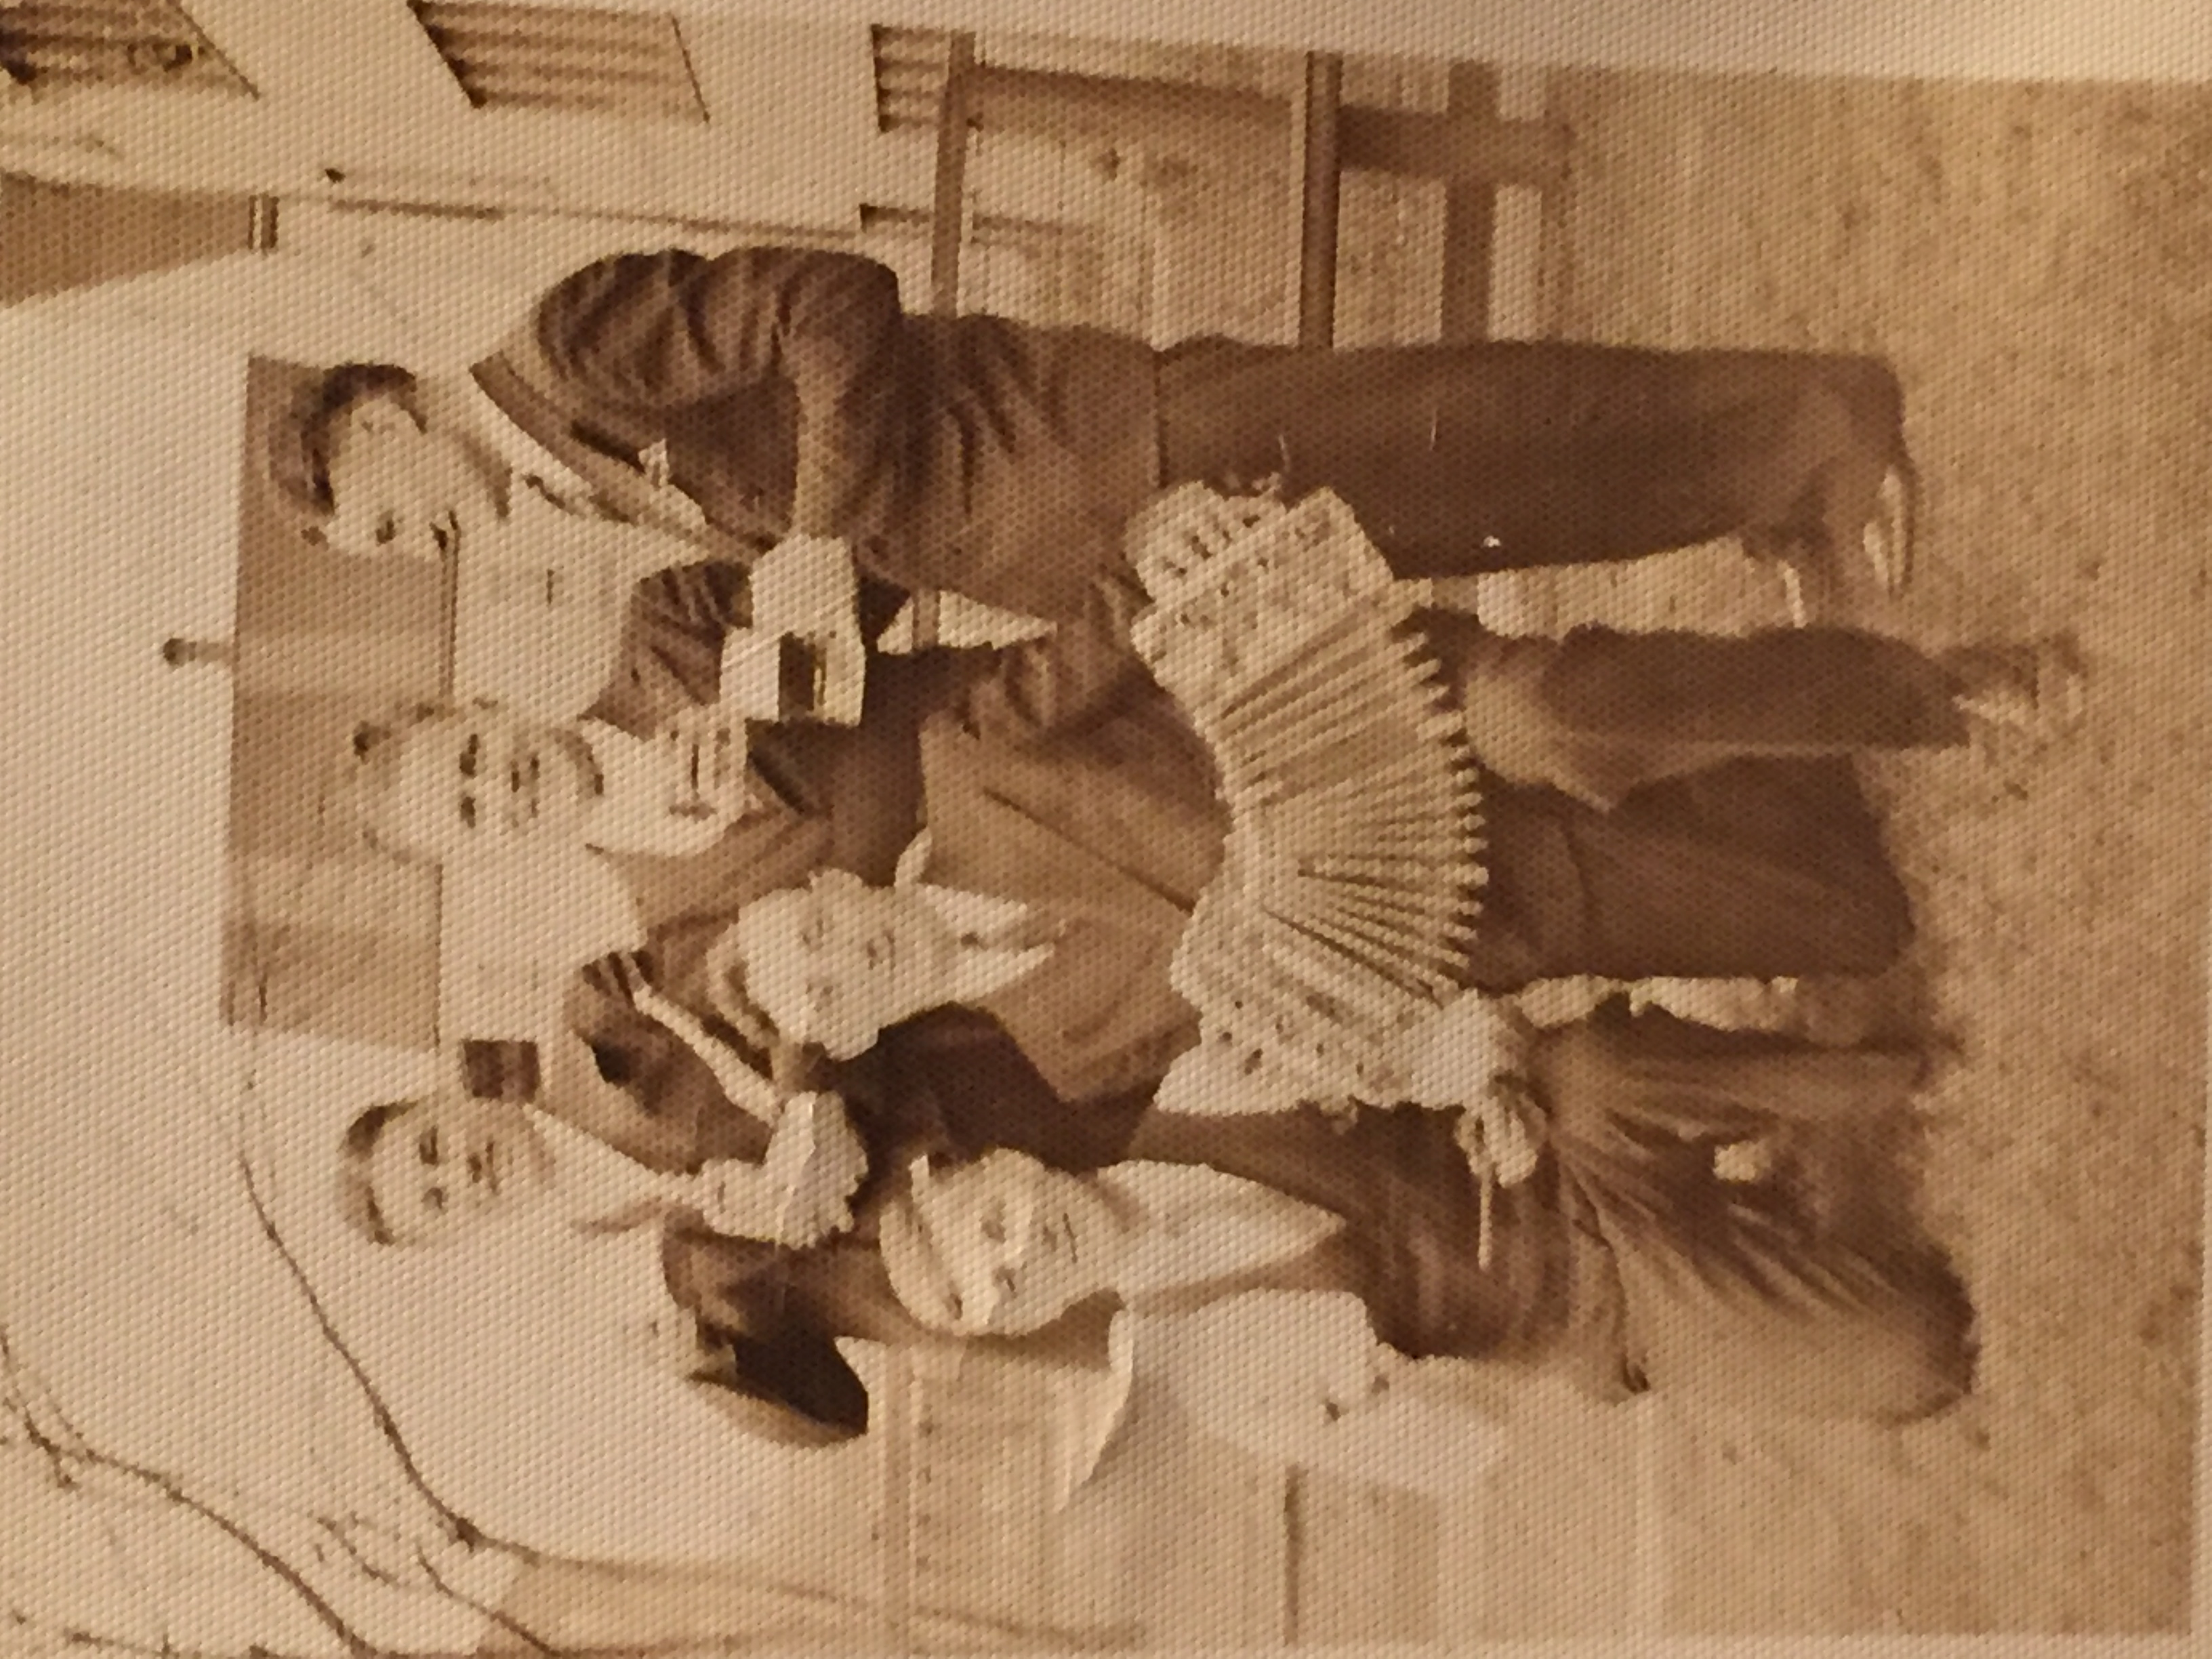 Family, Chester Raclawski (concertina) on the left is Andrew Szramkowski my Great Grandpa and his sons Joe and Ben on far right. "Gabby" in the middle friend of the family